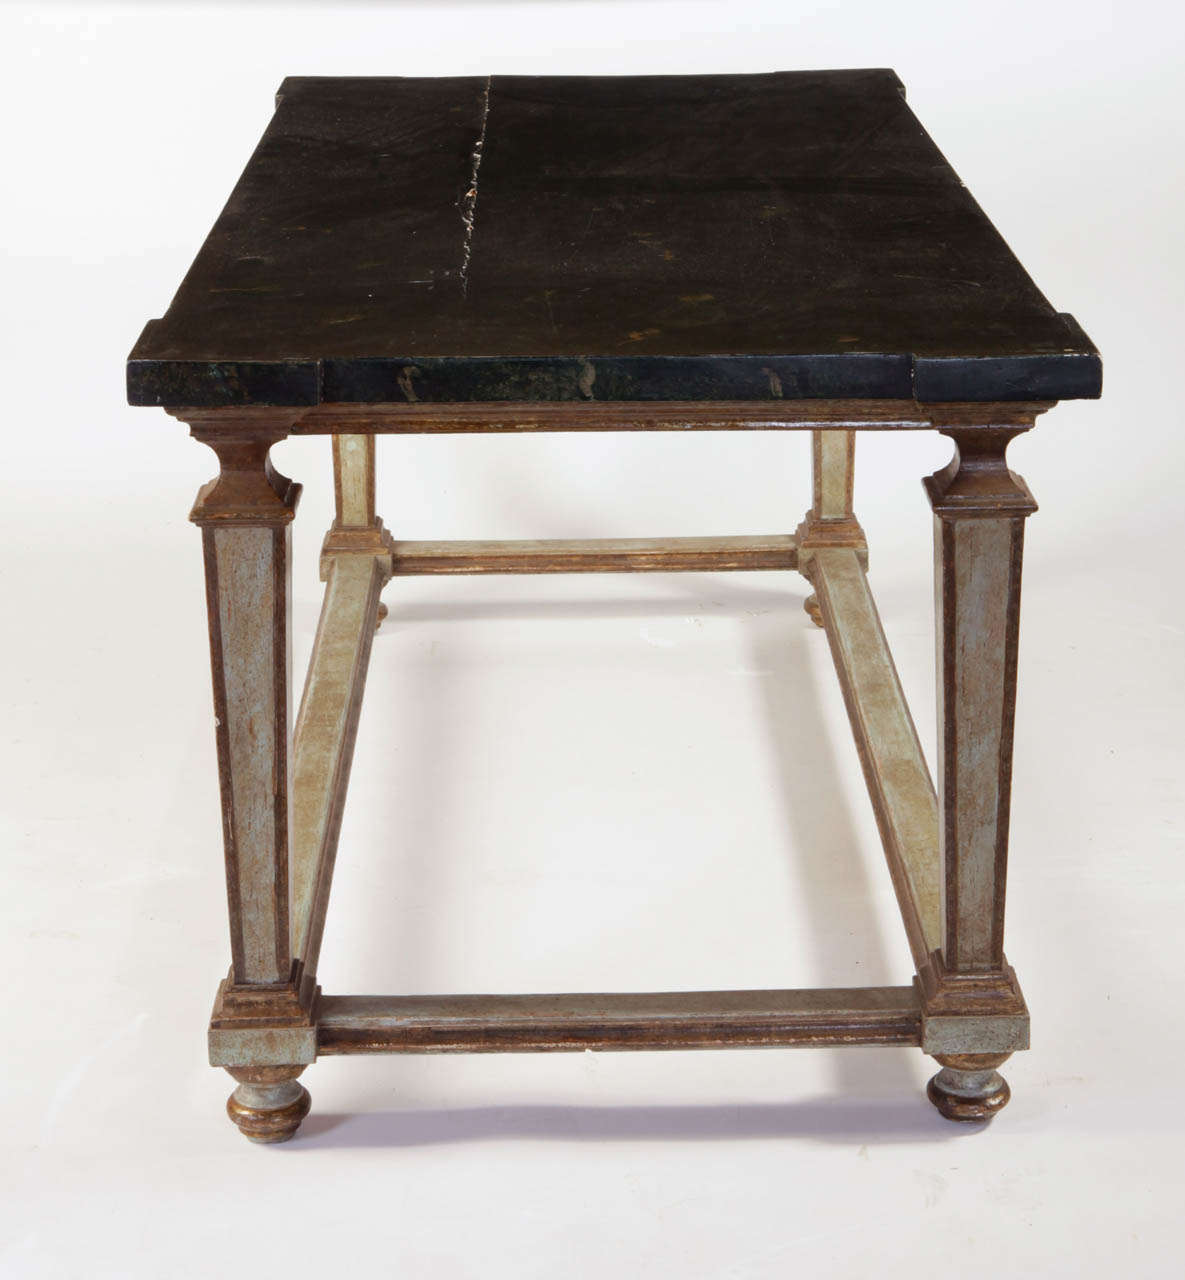 Wood A Fine Italian 17th Century Painted Center Table For Sale